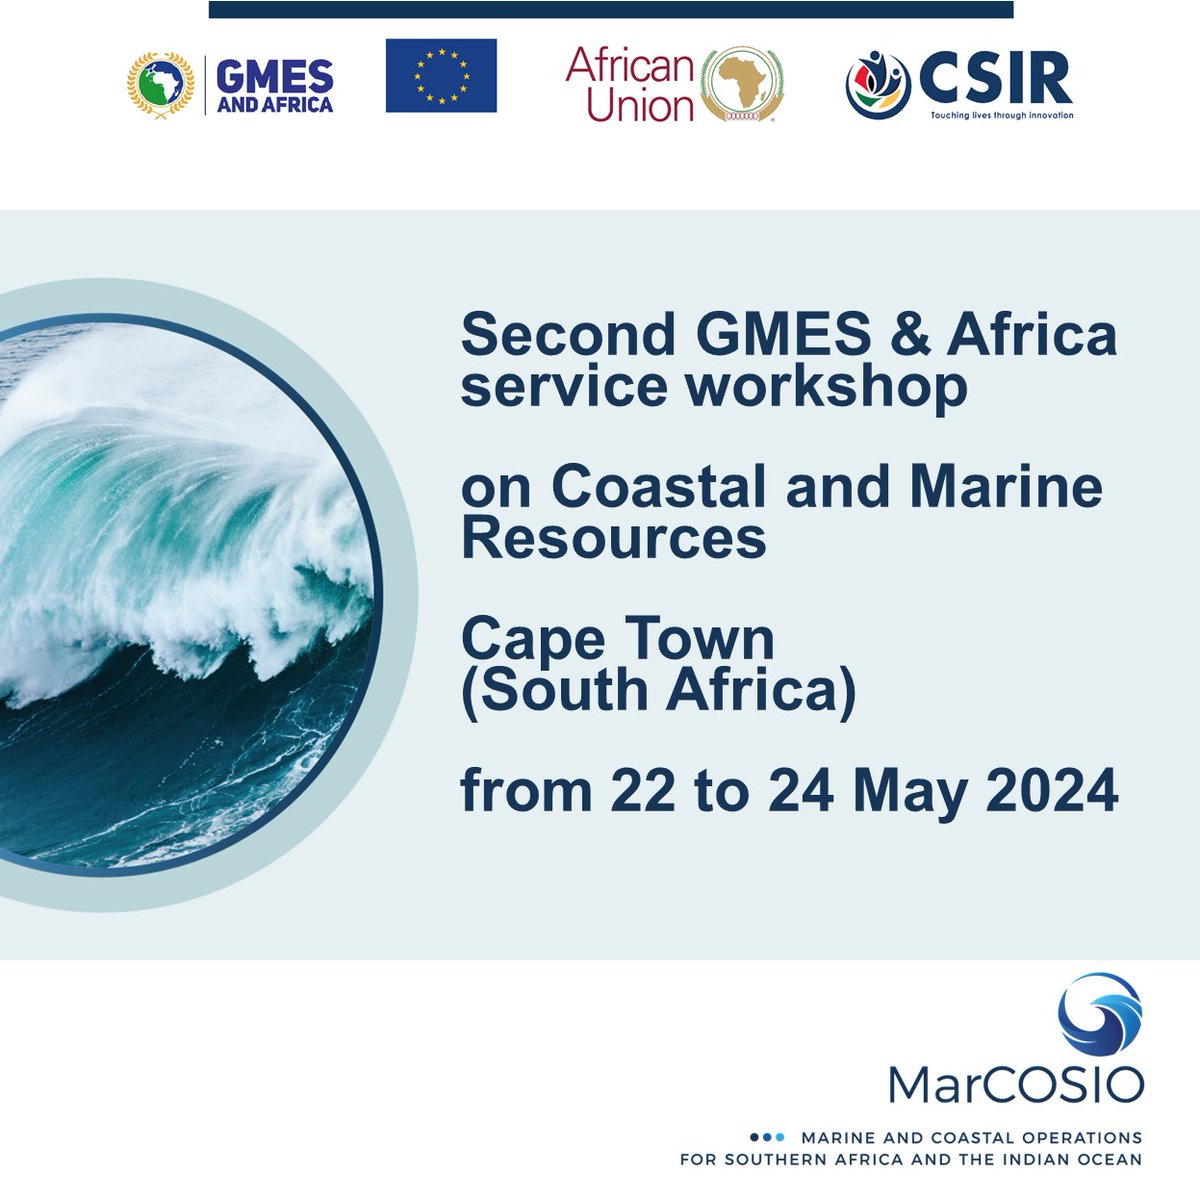 The 2nd #GMES & Africa workshop on Coastal and Marine Resources will take place in #CapeTown, #SouthAfrica. This workshop will be hosted by the African Union Commission in partnership with the @CSIR and the @UniversityofGhana. @GMESAfrica #GMESServices @EU_Commission @nafcoast